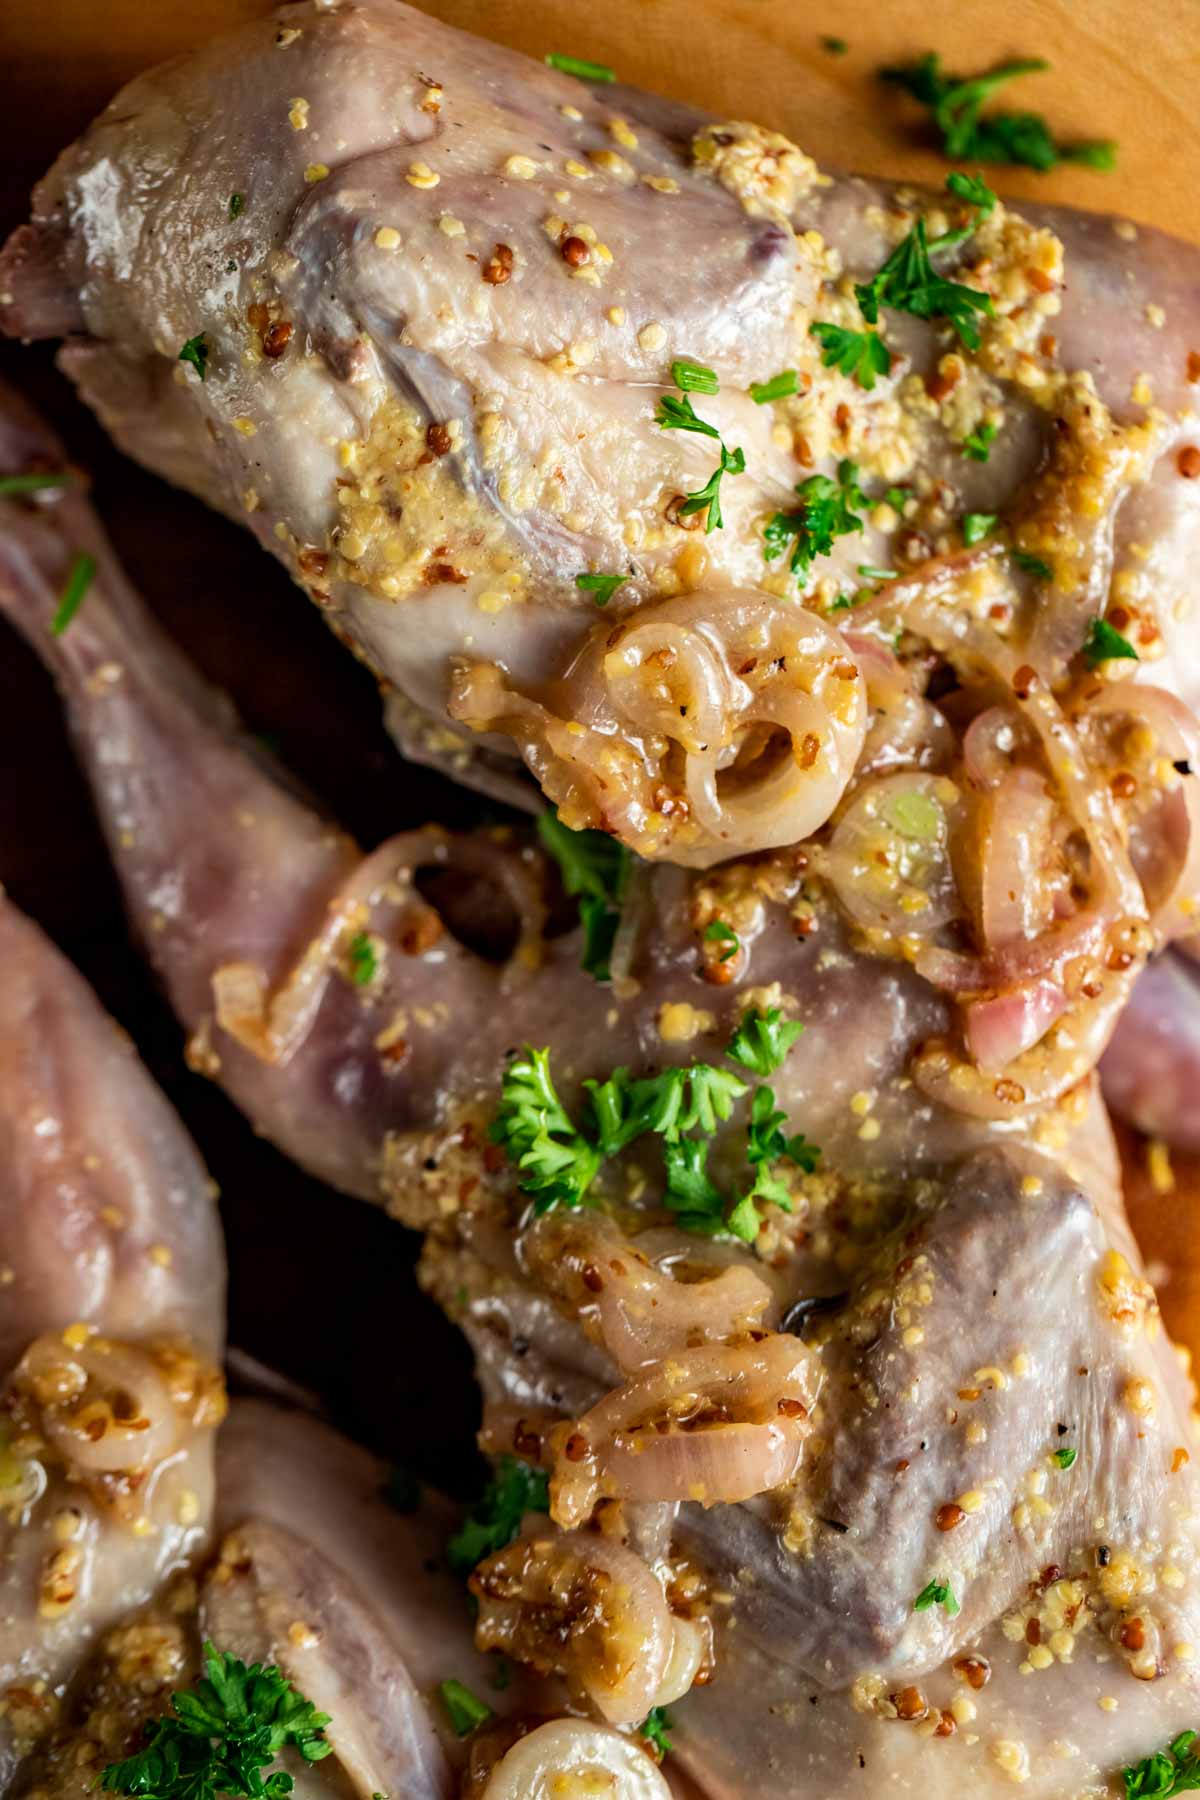 Close up view of cooked quail with shallots, herbs and other seasonings on top.